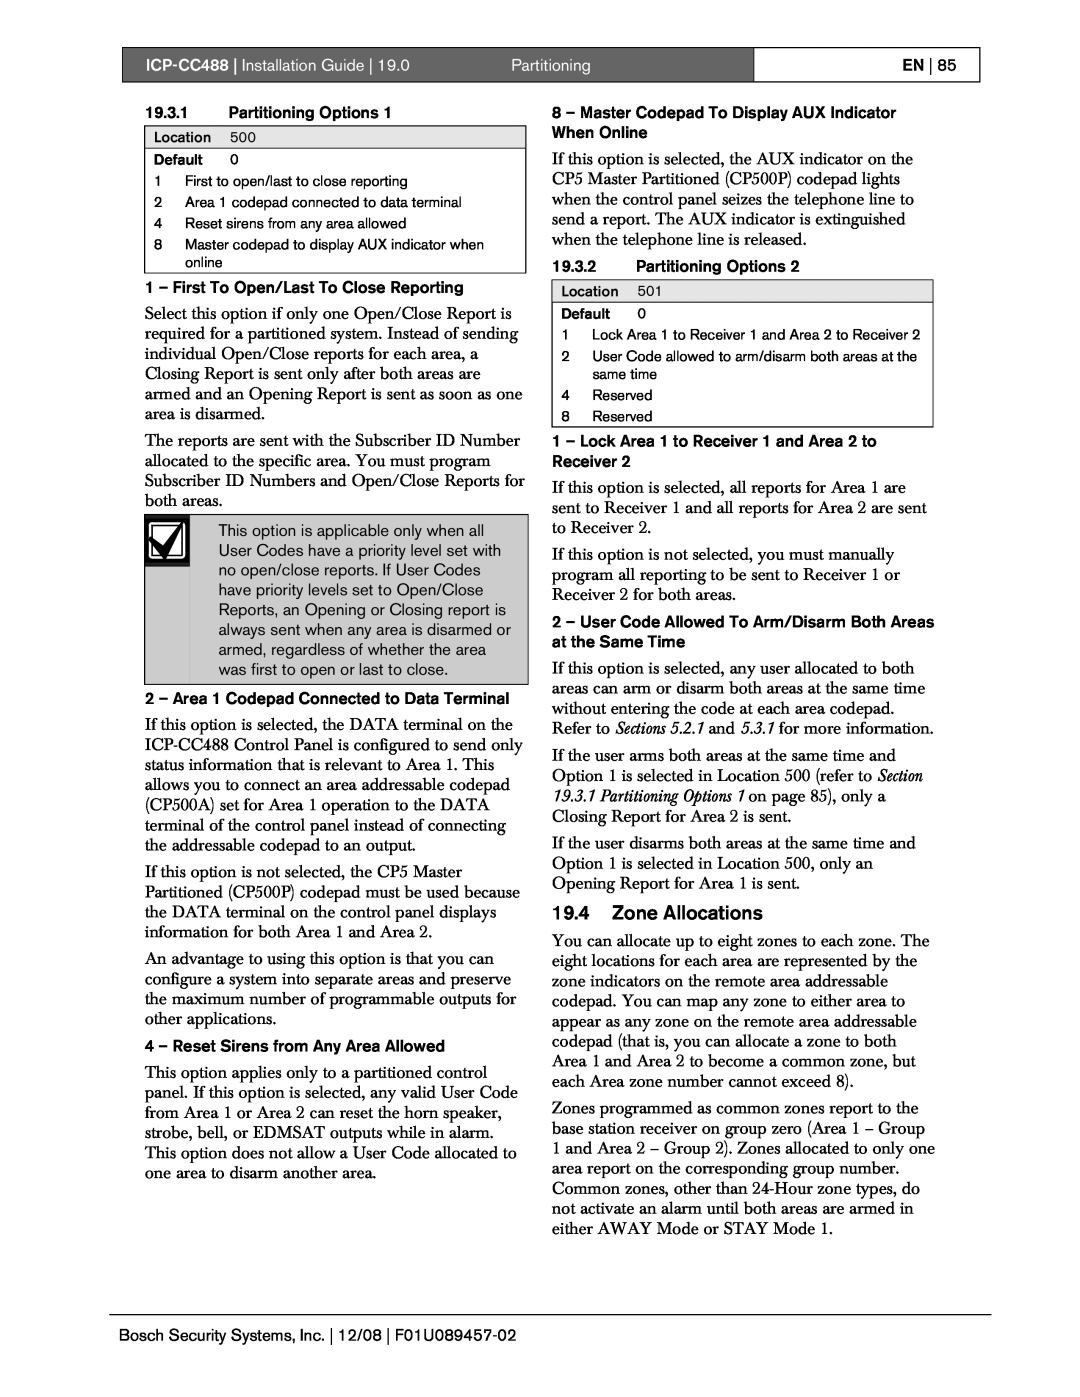 Bosch Appliances manual 19.4Zone Allocations, ICP-CC488| Installation Guide, Partitioning 